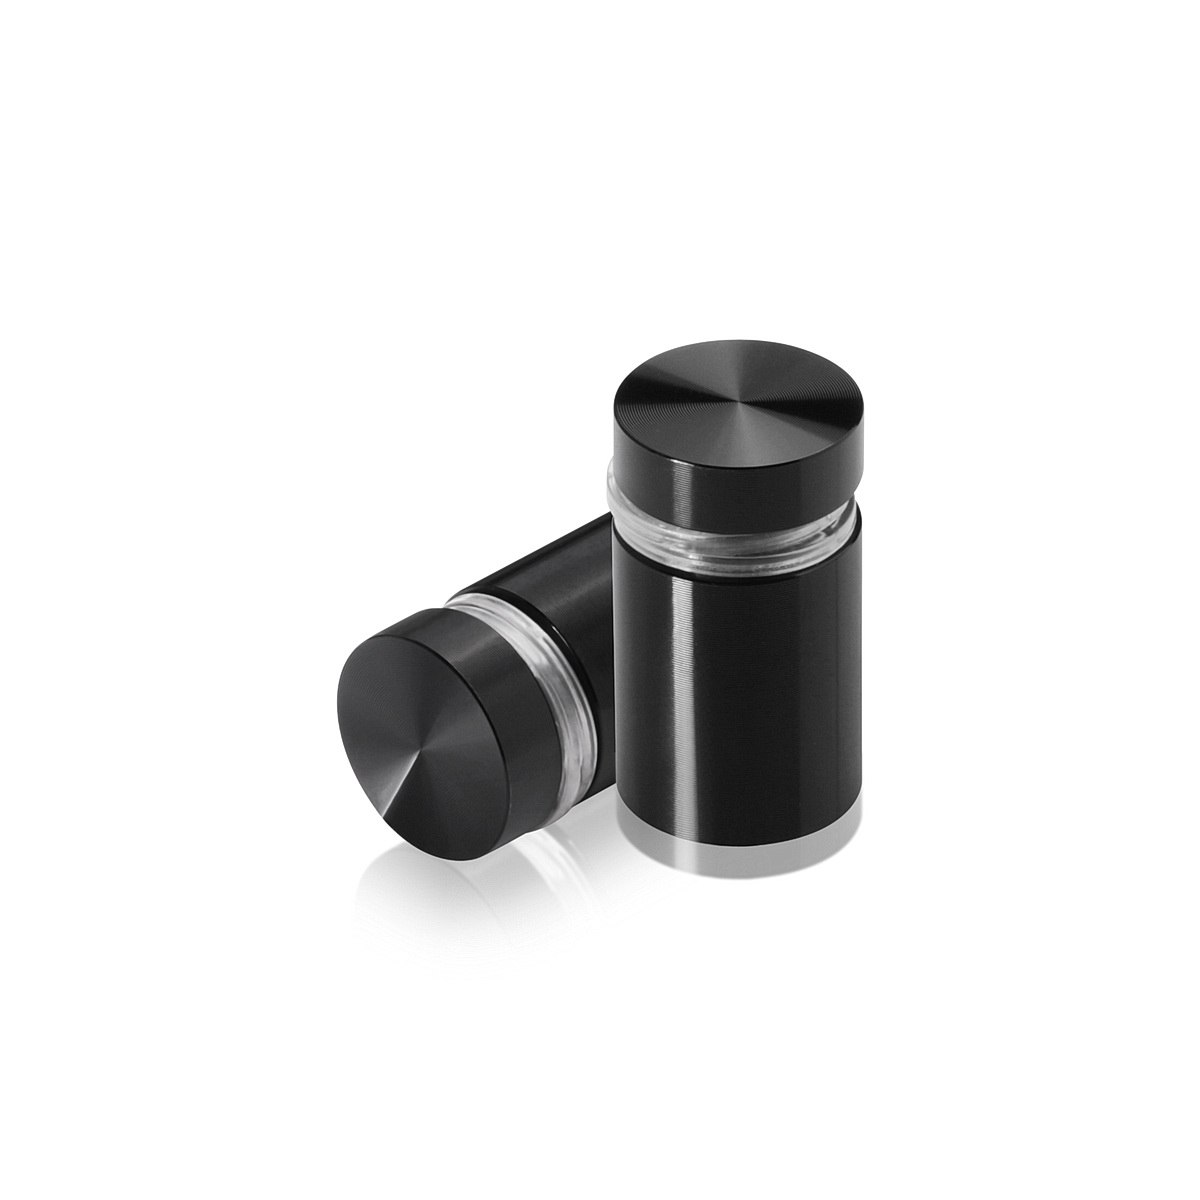 5/8'' Diameter X 3/4'' Barrel Length, Aluminum Flat Head Standoffs, Black Anodized Finish Easy Fasten Standoff (For Inside / Outside use) Tamper Proof Standoff [Required Material Hole Size: 7/16'']